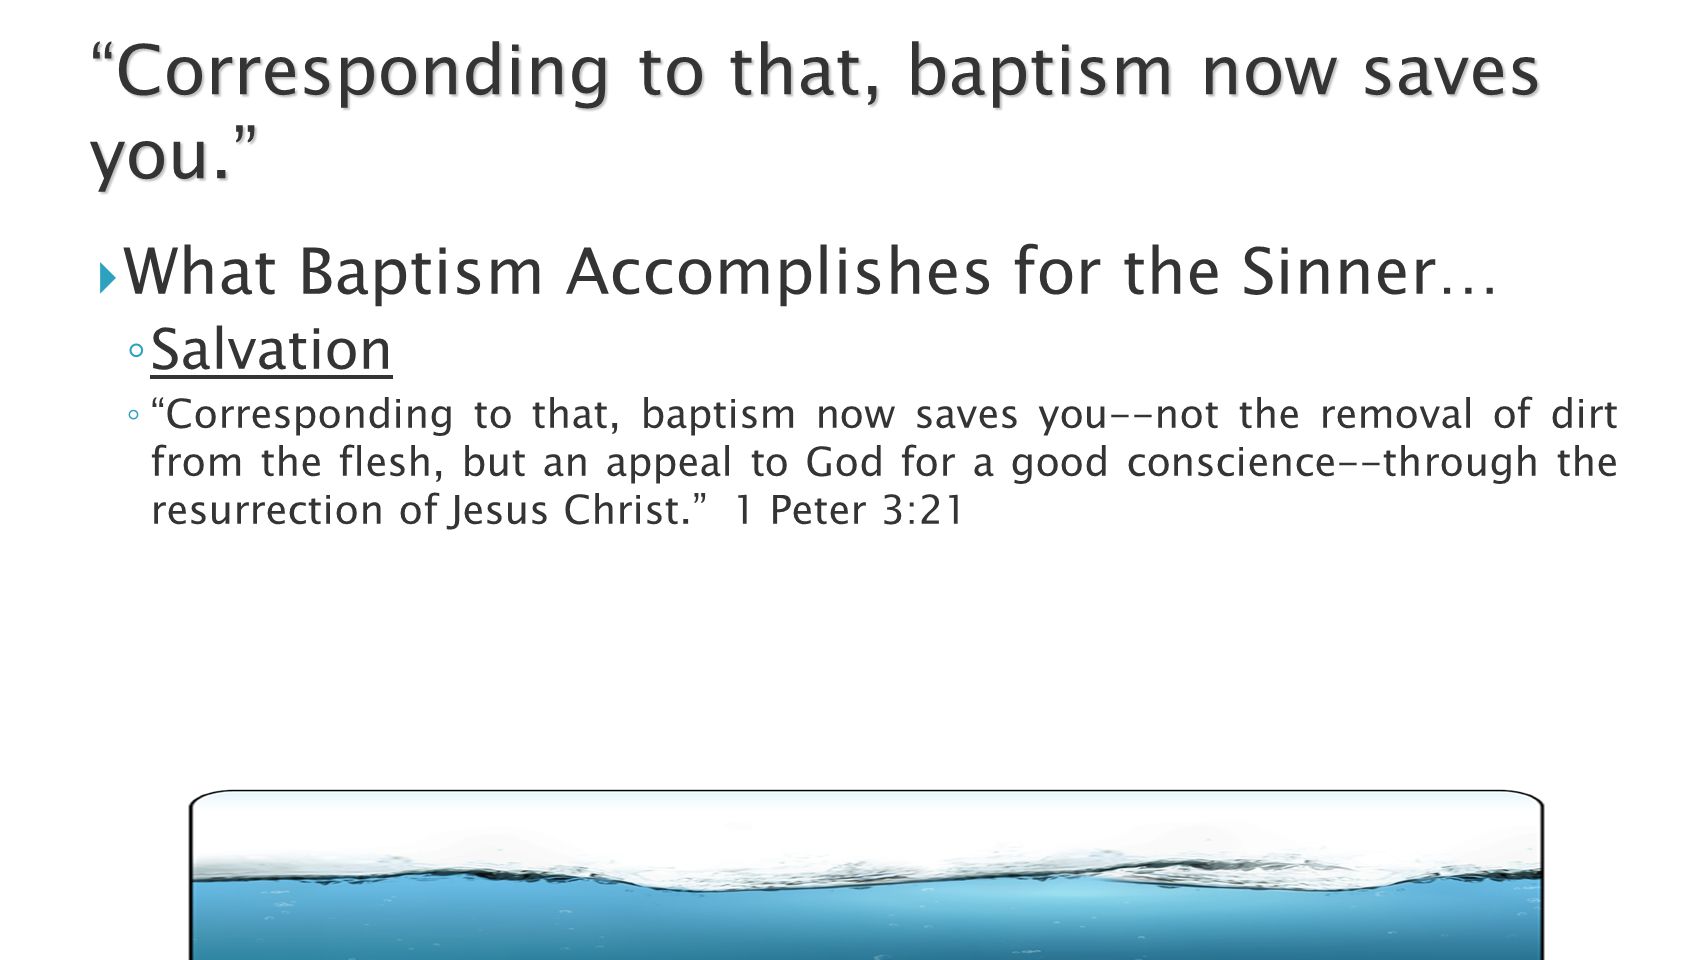  What Baptism Accomplishes for the Sinner… ◦ Salvation ◦ Corresponding to that, baptism now saves you--not the removal of dirt from the flesh, but an appeal to God for a good conscience--through the resurrection of Jesus Christ. 1 Peter 3:21 Corresponding to that, baptism now saves you.